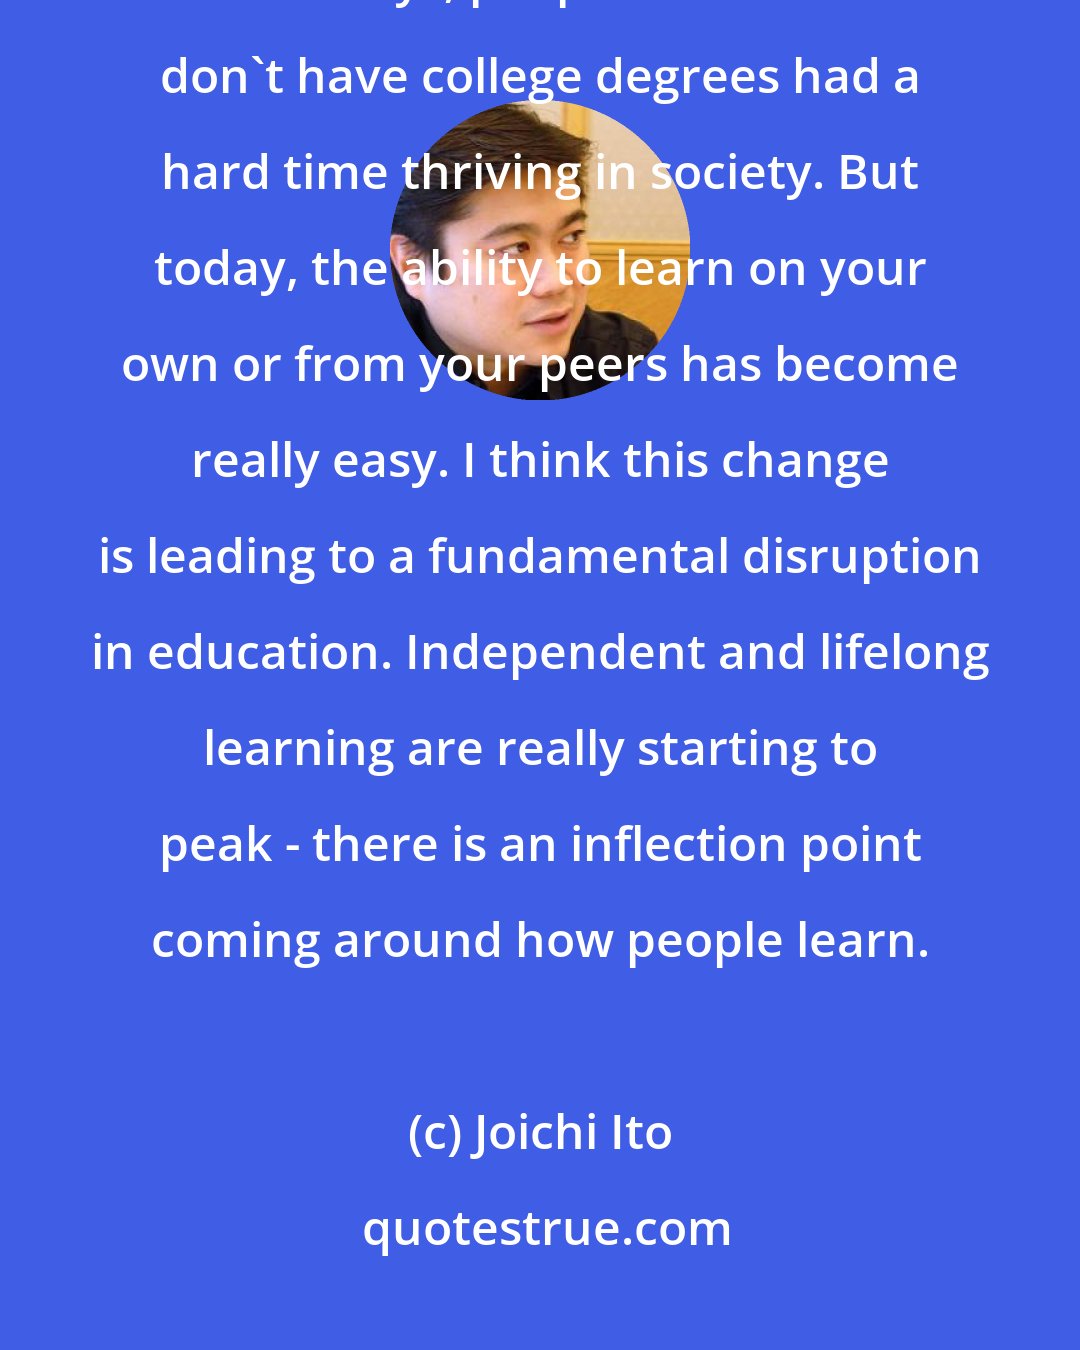 Joichi Ito: Consequently, the only thing I learned in school was typing. In the old days, people like me who don't have college degrees had a hard time thriving in society. But today, the ability to learn on your own or from your peers has become really easy. I think this change is leading to a fundamental disruption in education. Independent and lifelong learning are really starting to peak - there is an inflection point coming around how people learn.